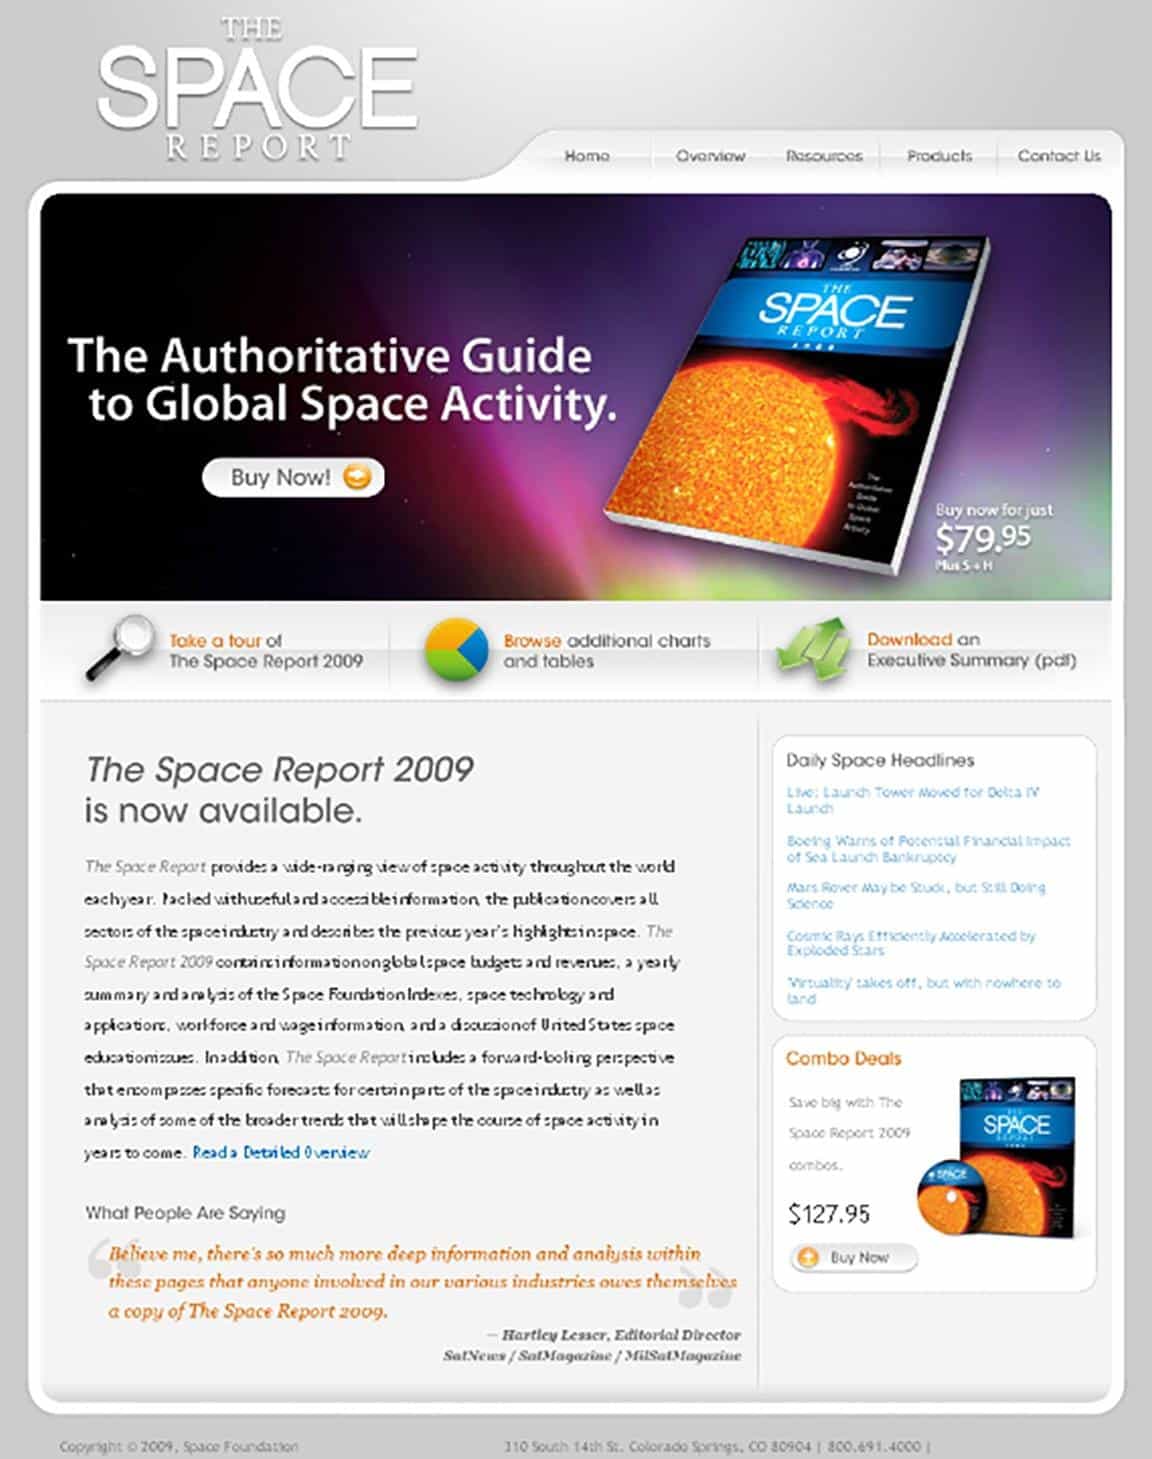 WOW! Factor Digital Marketing | Global Digital Marketing Agency The Space Report 2011 The Authoritative Guide to Global Space Activity 1289589674682